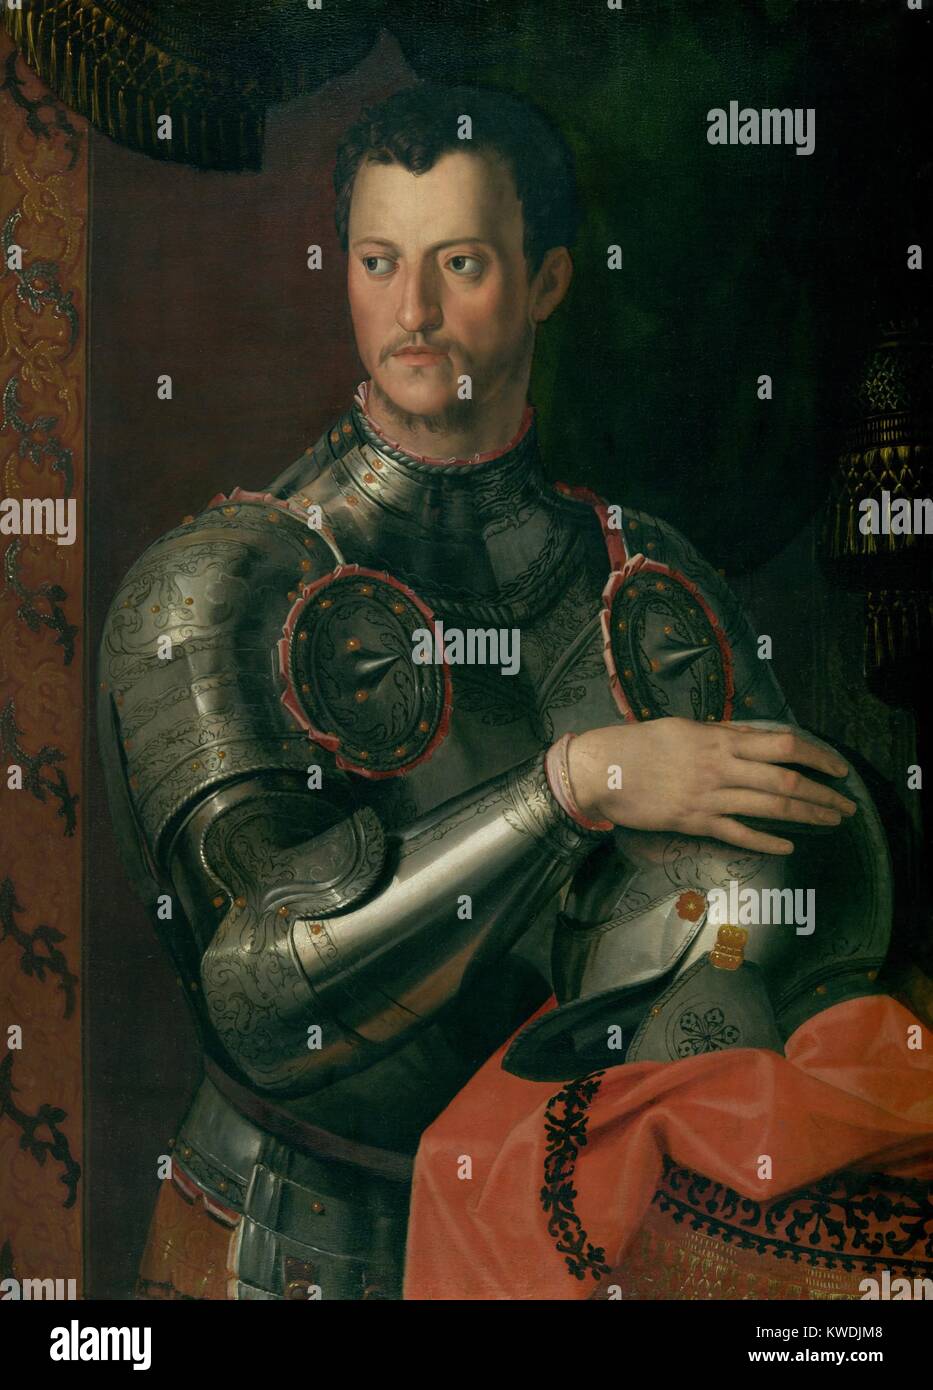 COSINO I DE’ MEDICI, by Workshop of Bronzino, 1550–74, Italian Renaissance painting, oil on wood. Cosimo ascended to power when, the Duke of Florence, Alessandro de Medici, was assassinated in 1537. Central Italy was disrupted by regional and international war during most of his 34 years rule (BSLOC 2017 16 85) Stock Photo